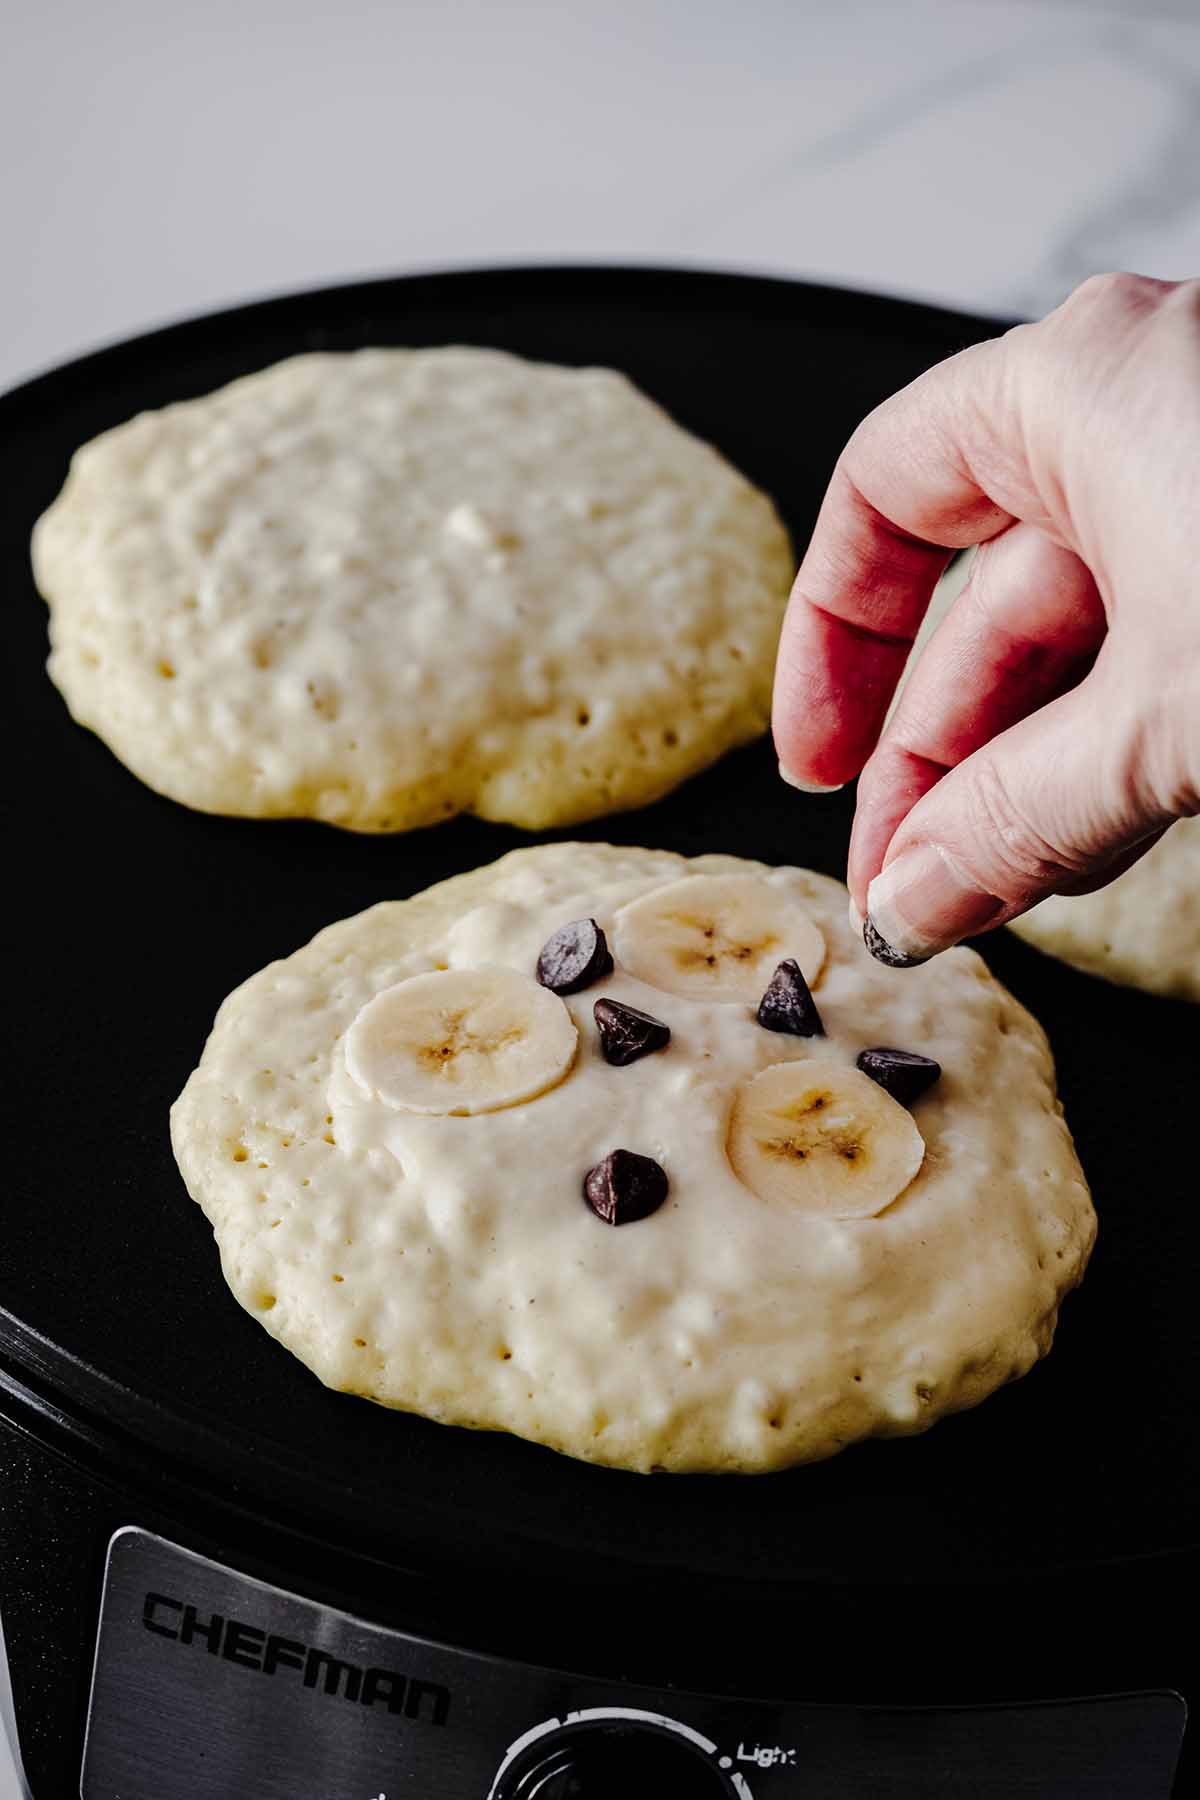 Chocolate chips and sliced bananas being placed on uncooked side of a pancake